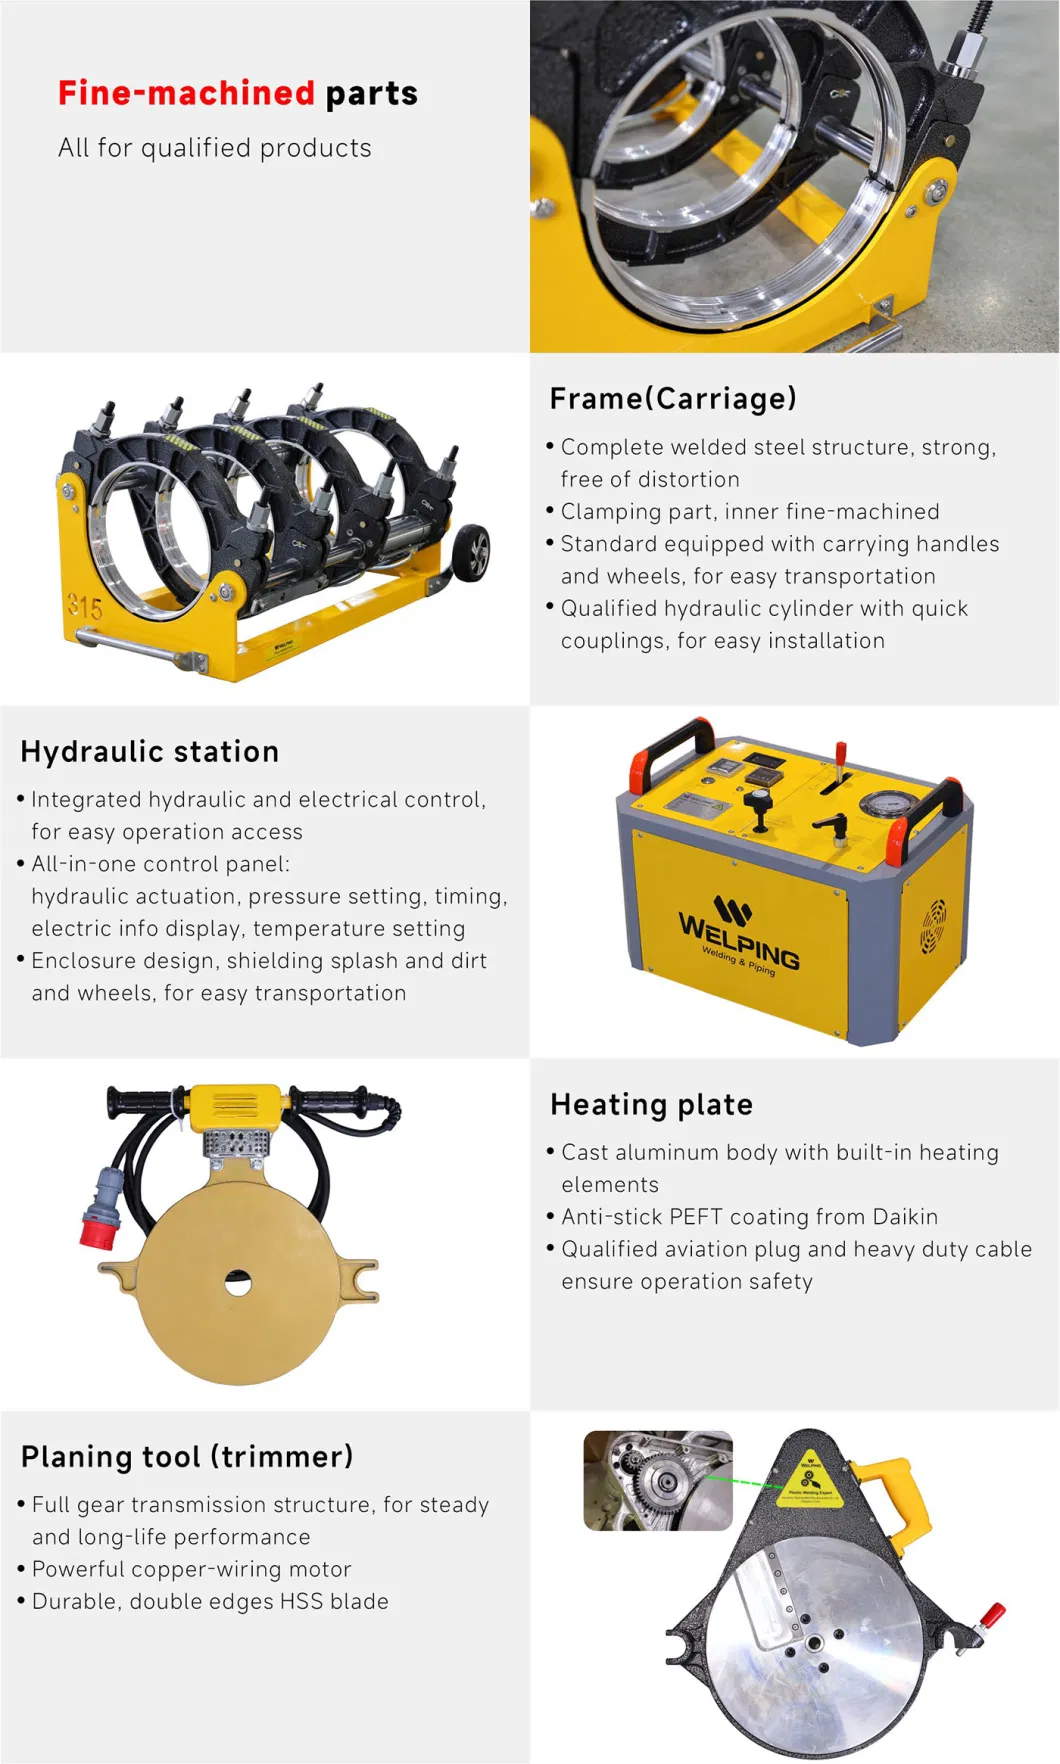 Butt Welder HDPE Pipe Jointing Machine HDPE Butt Welding Machine Hydraulic Fusion Machine Thermofusion Machine PE Poly Tube Fusion Machine Price